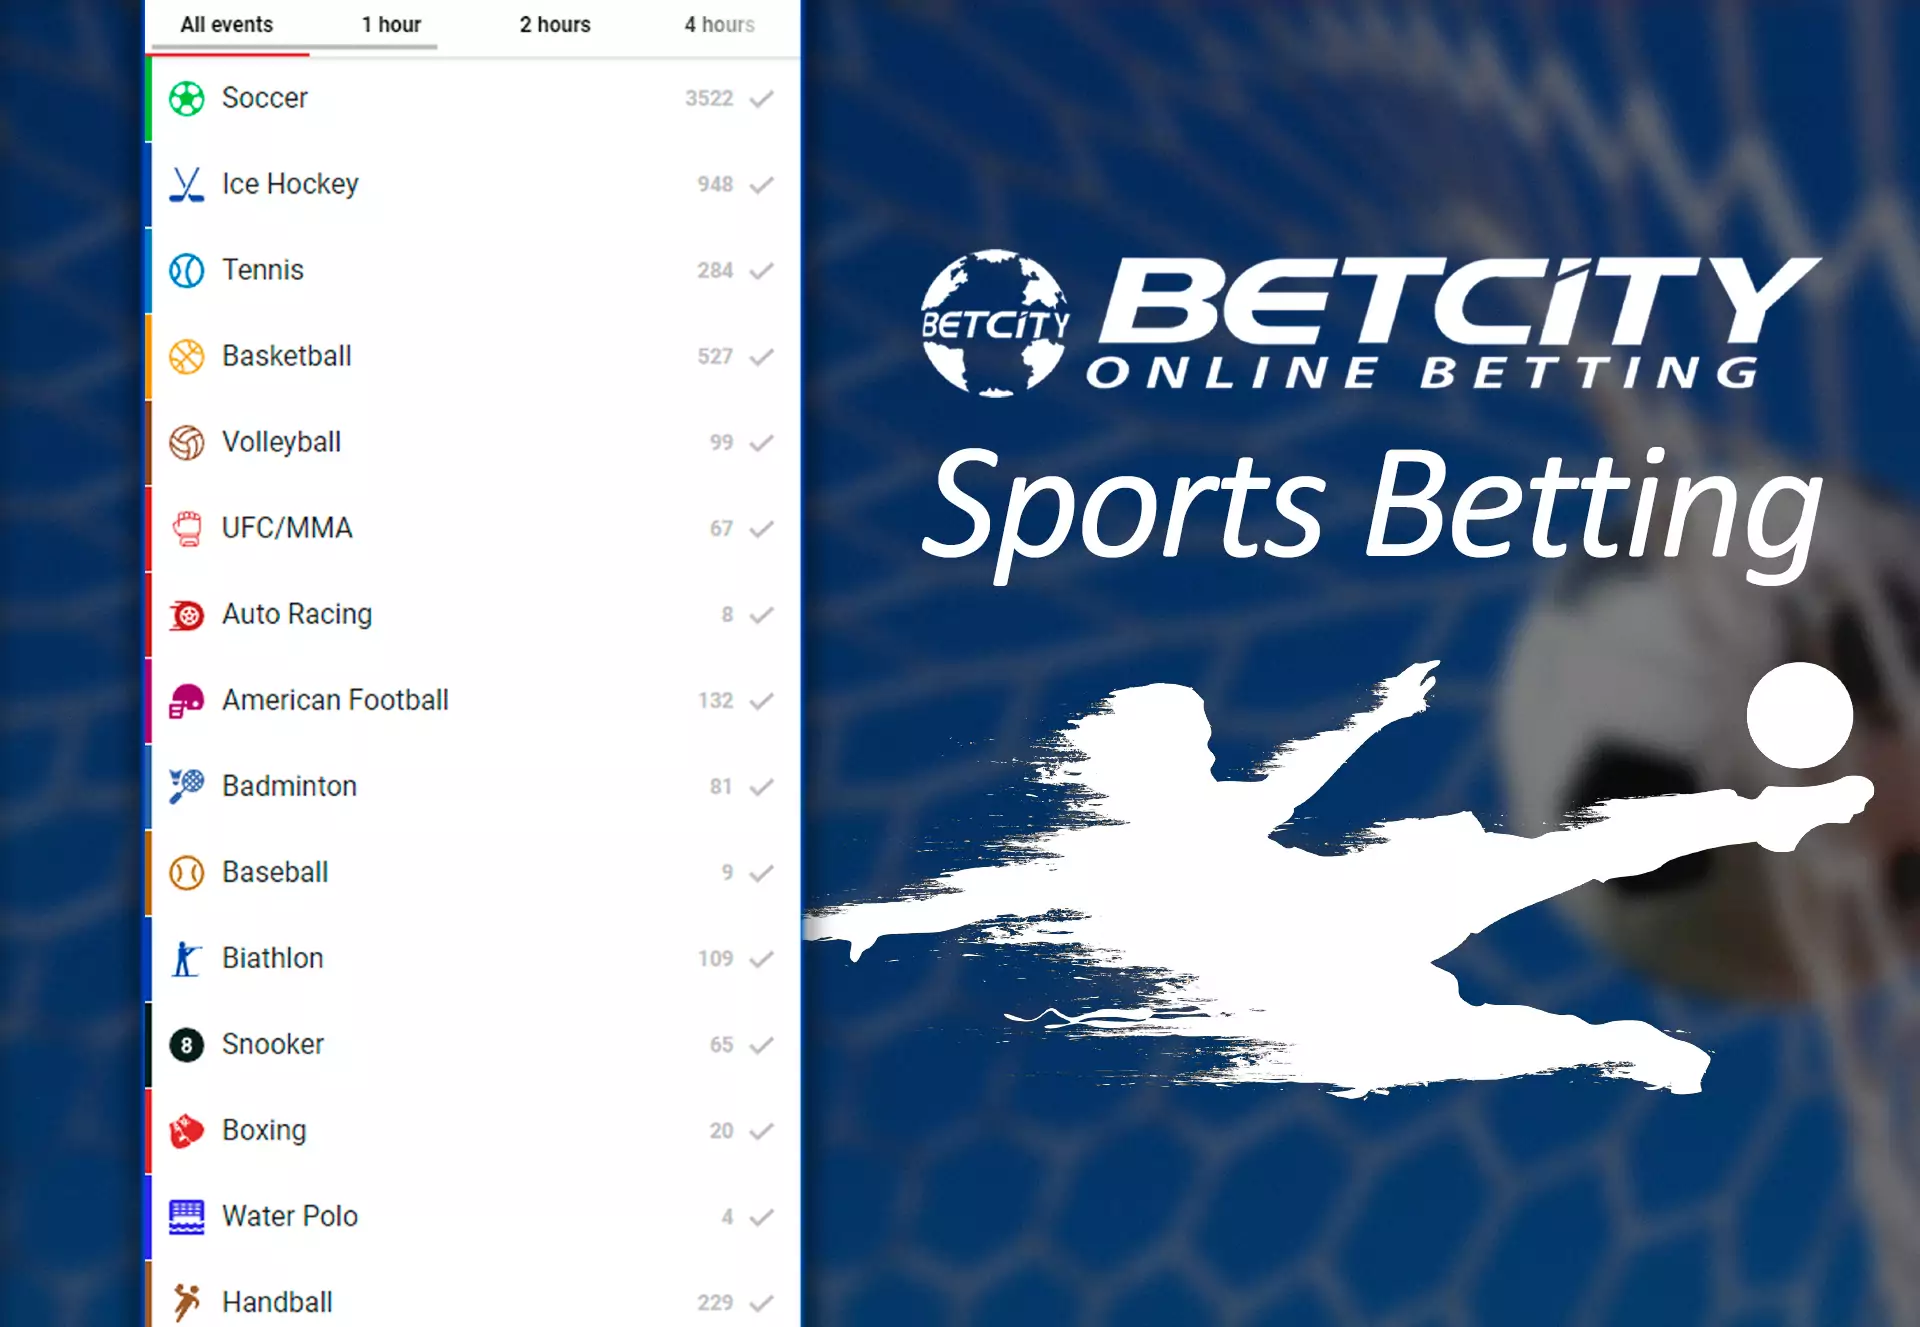 In the betting list, you find all the popular disciplines and the nearest matches.